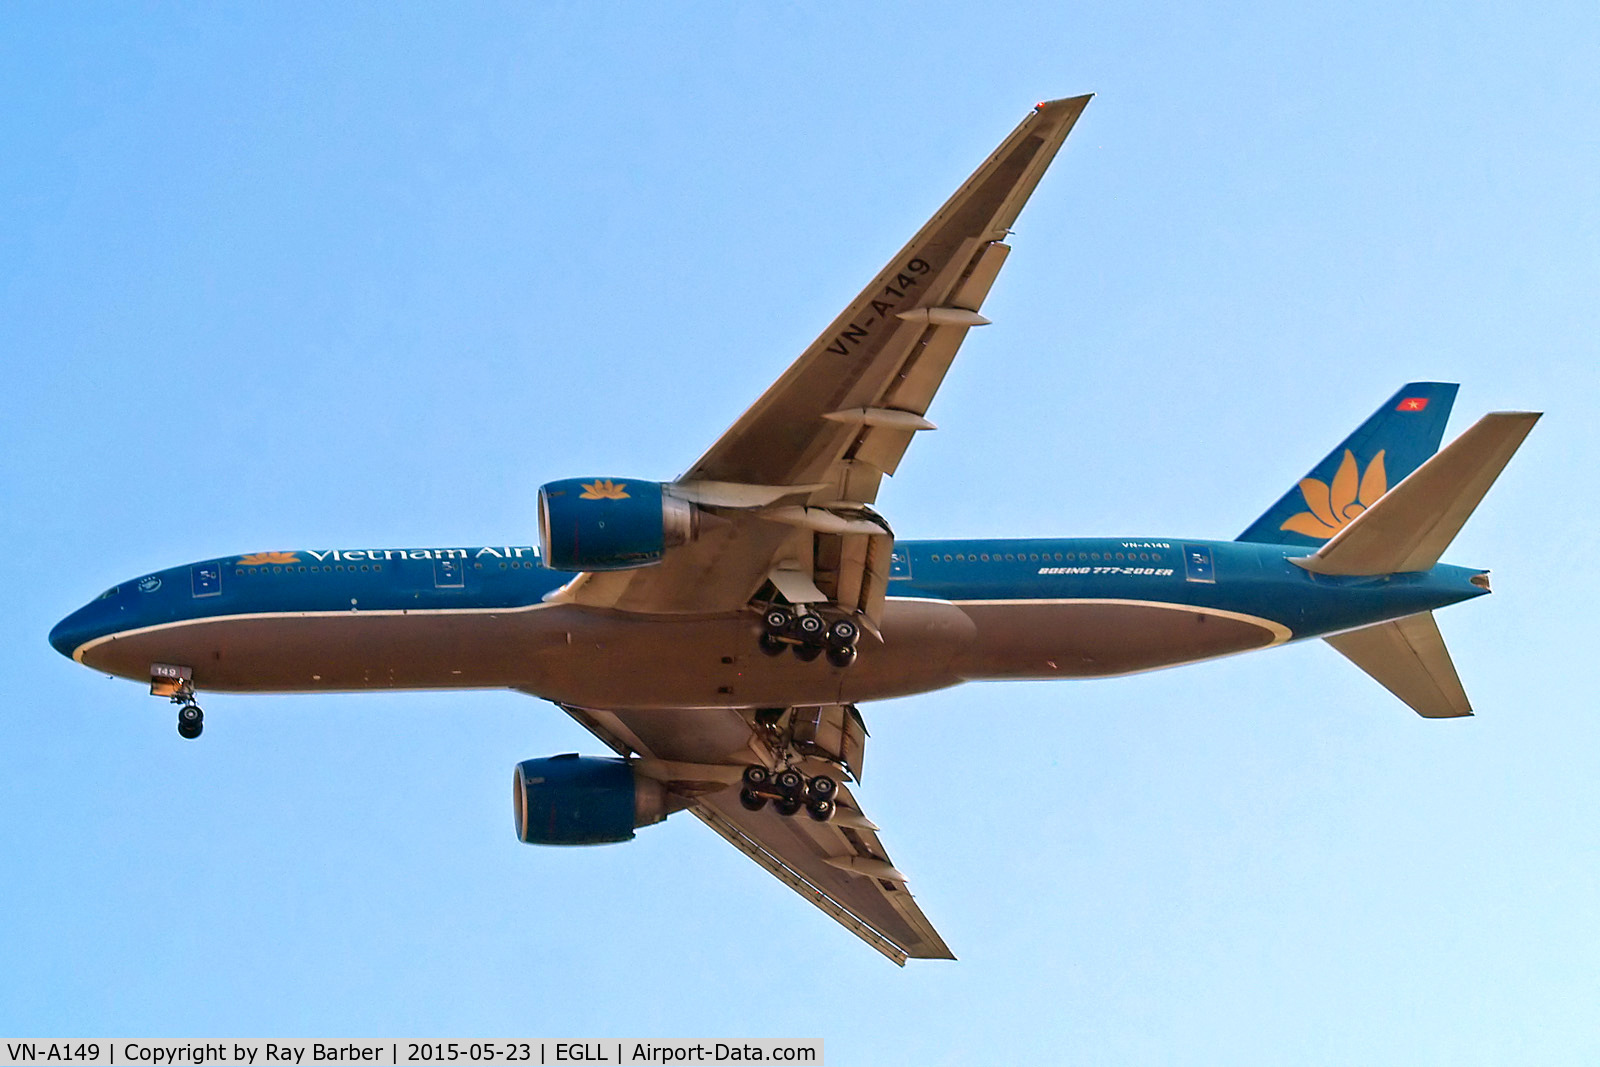 VN-A149, 2005 Boeing 777-2Q8/ER C/N 32716, VN-A149   Boeing 777-2Q8ER [32716] (Vietnam Airlines) Home~G 23/05/2015